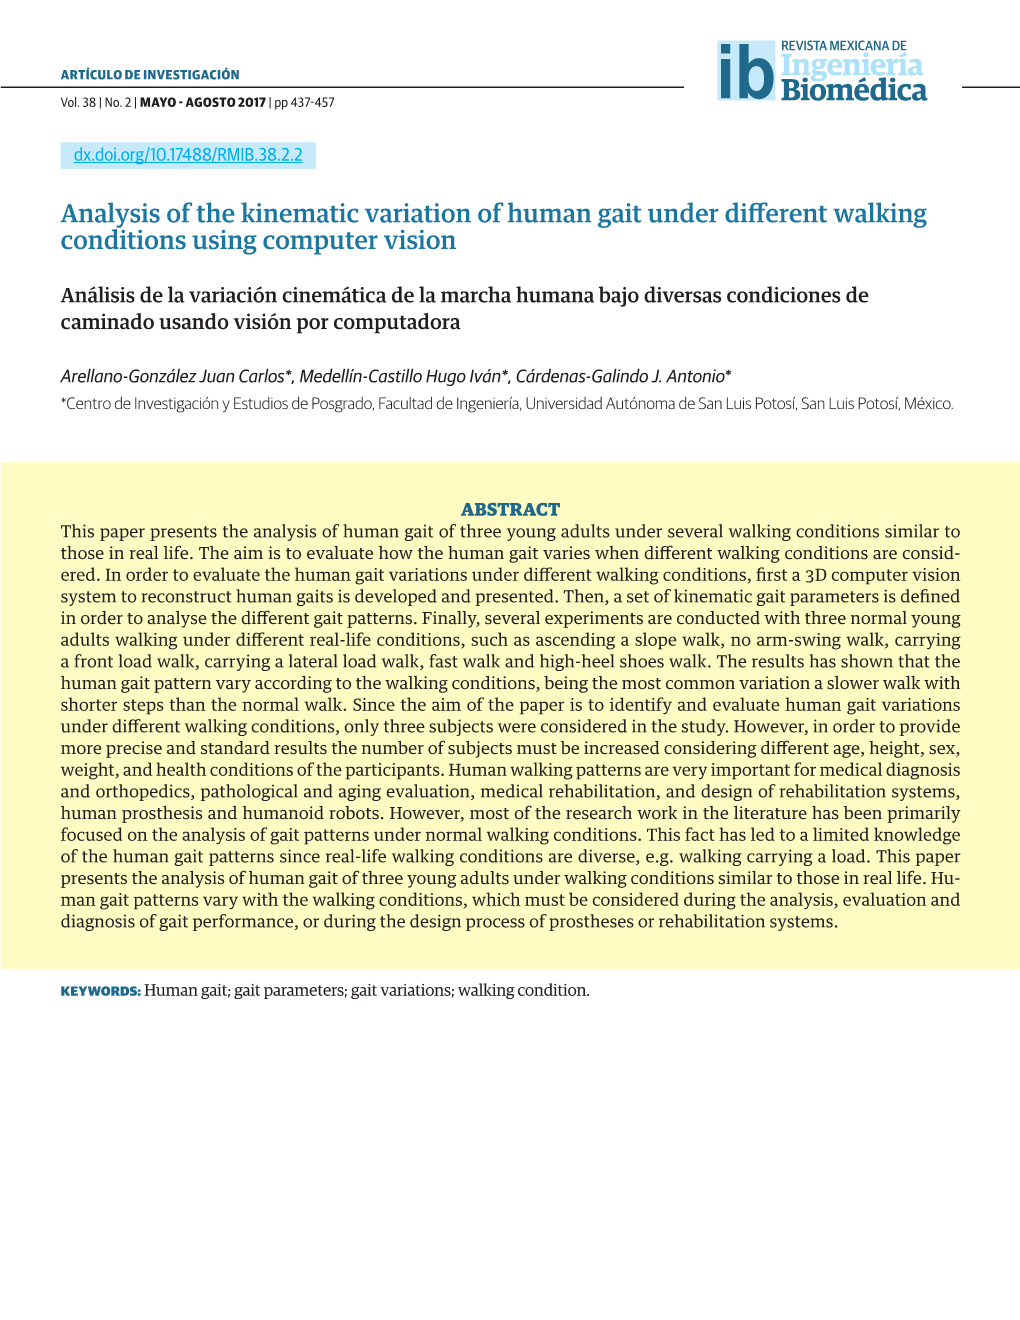 Analysis of the Kinematic Variation of Human Gait Under Different Walking Conditions Using Computer Vision 439